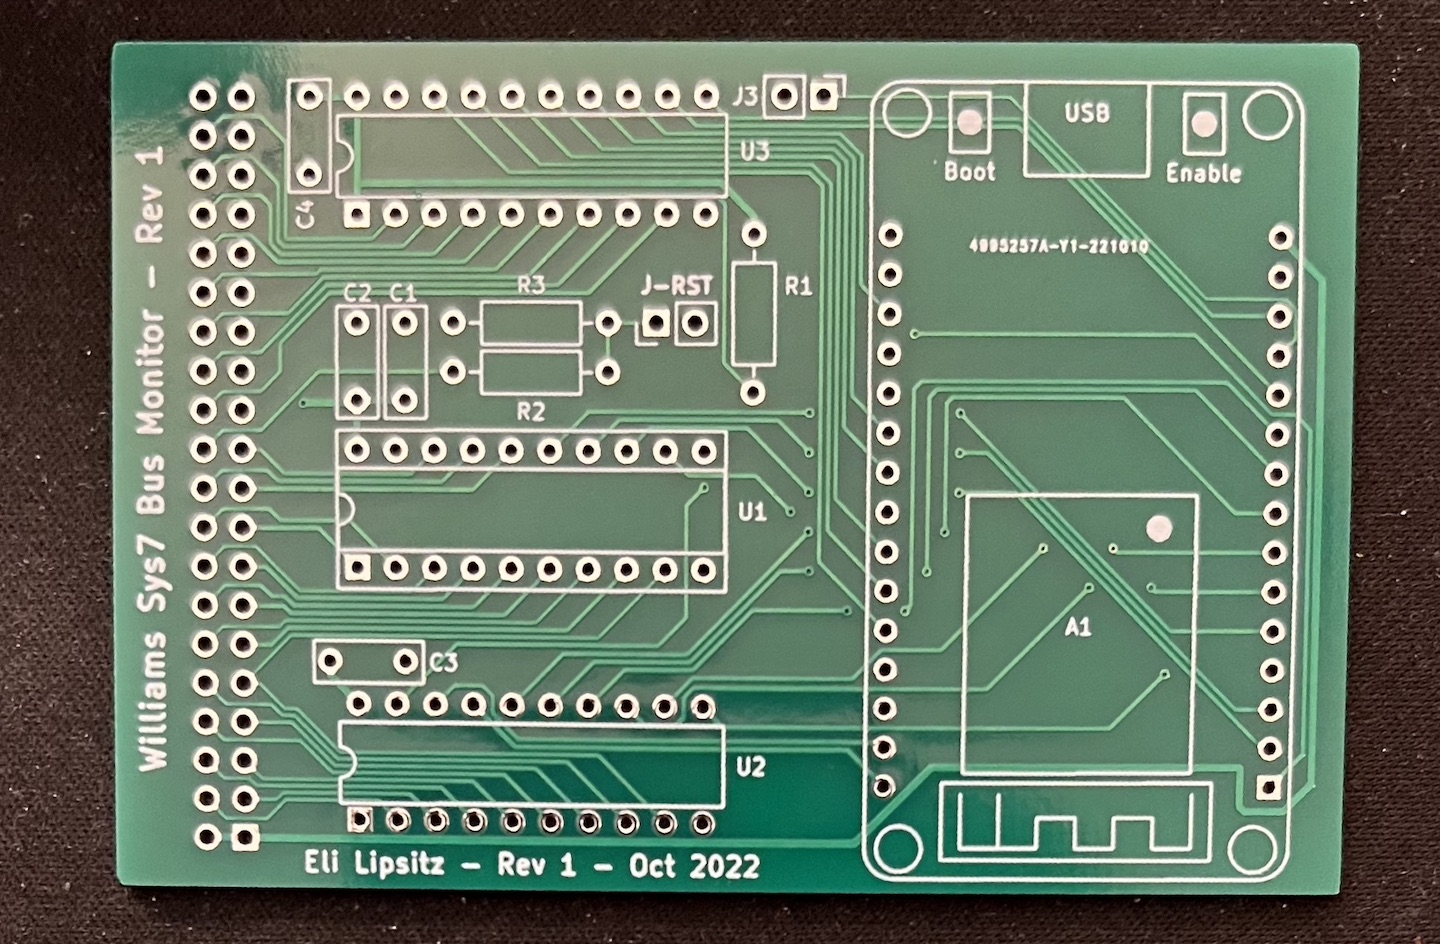 The manufactured PCB, in classic green